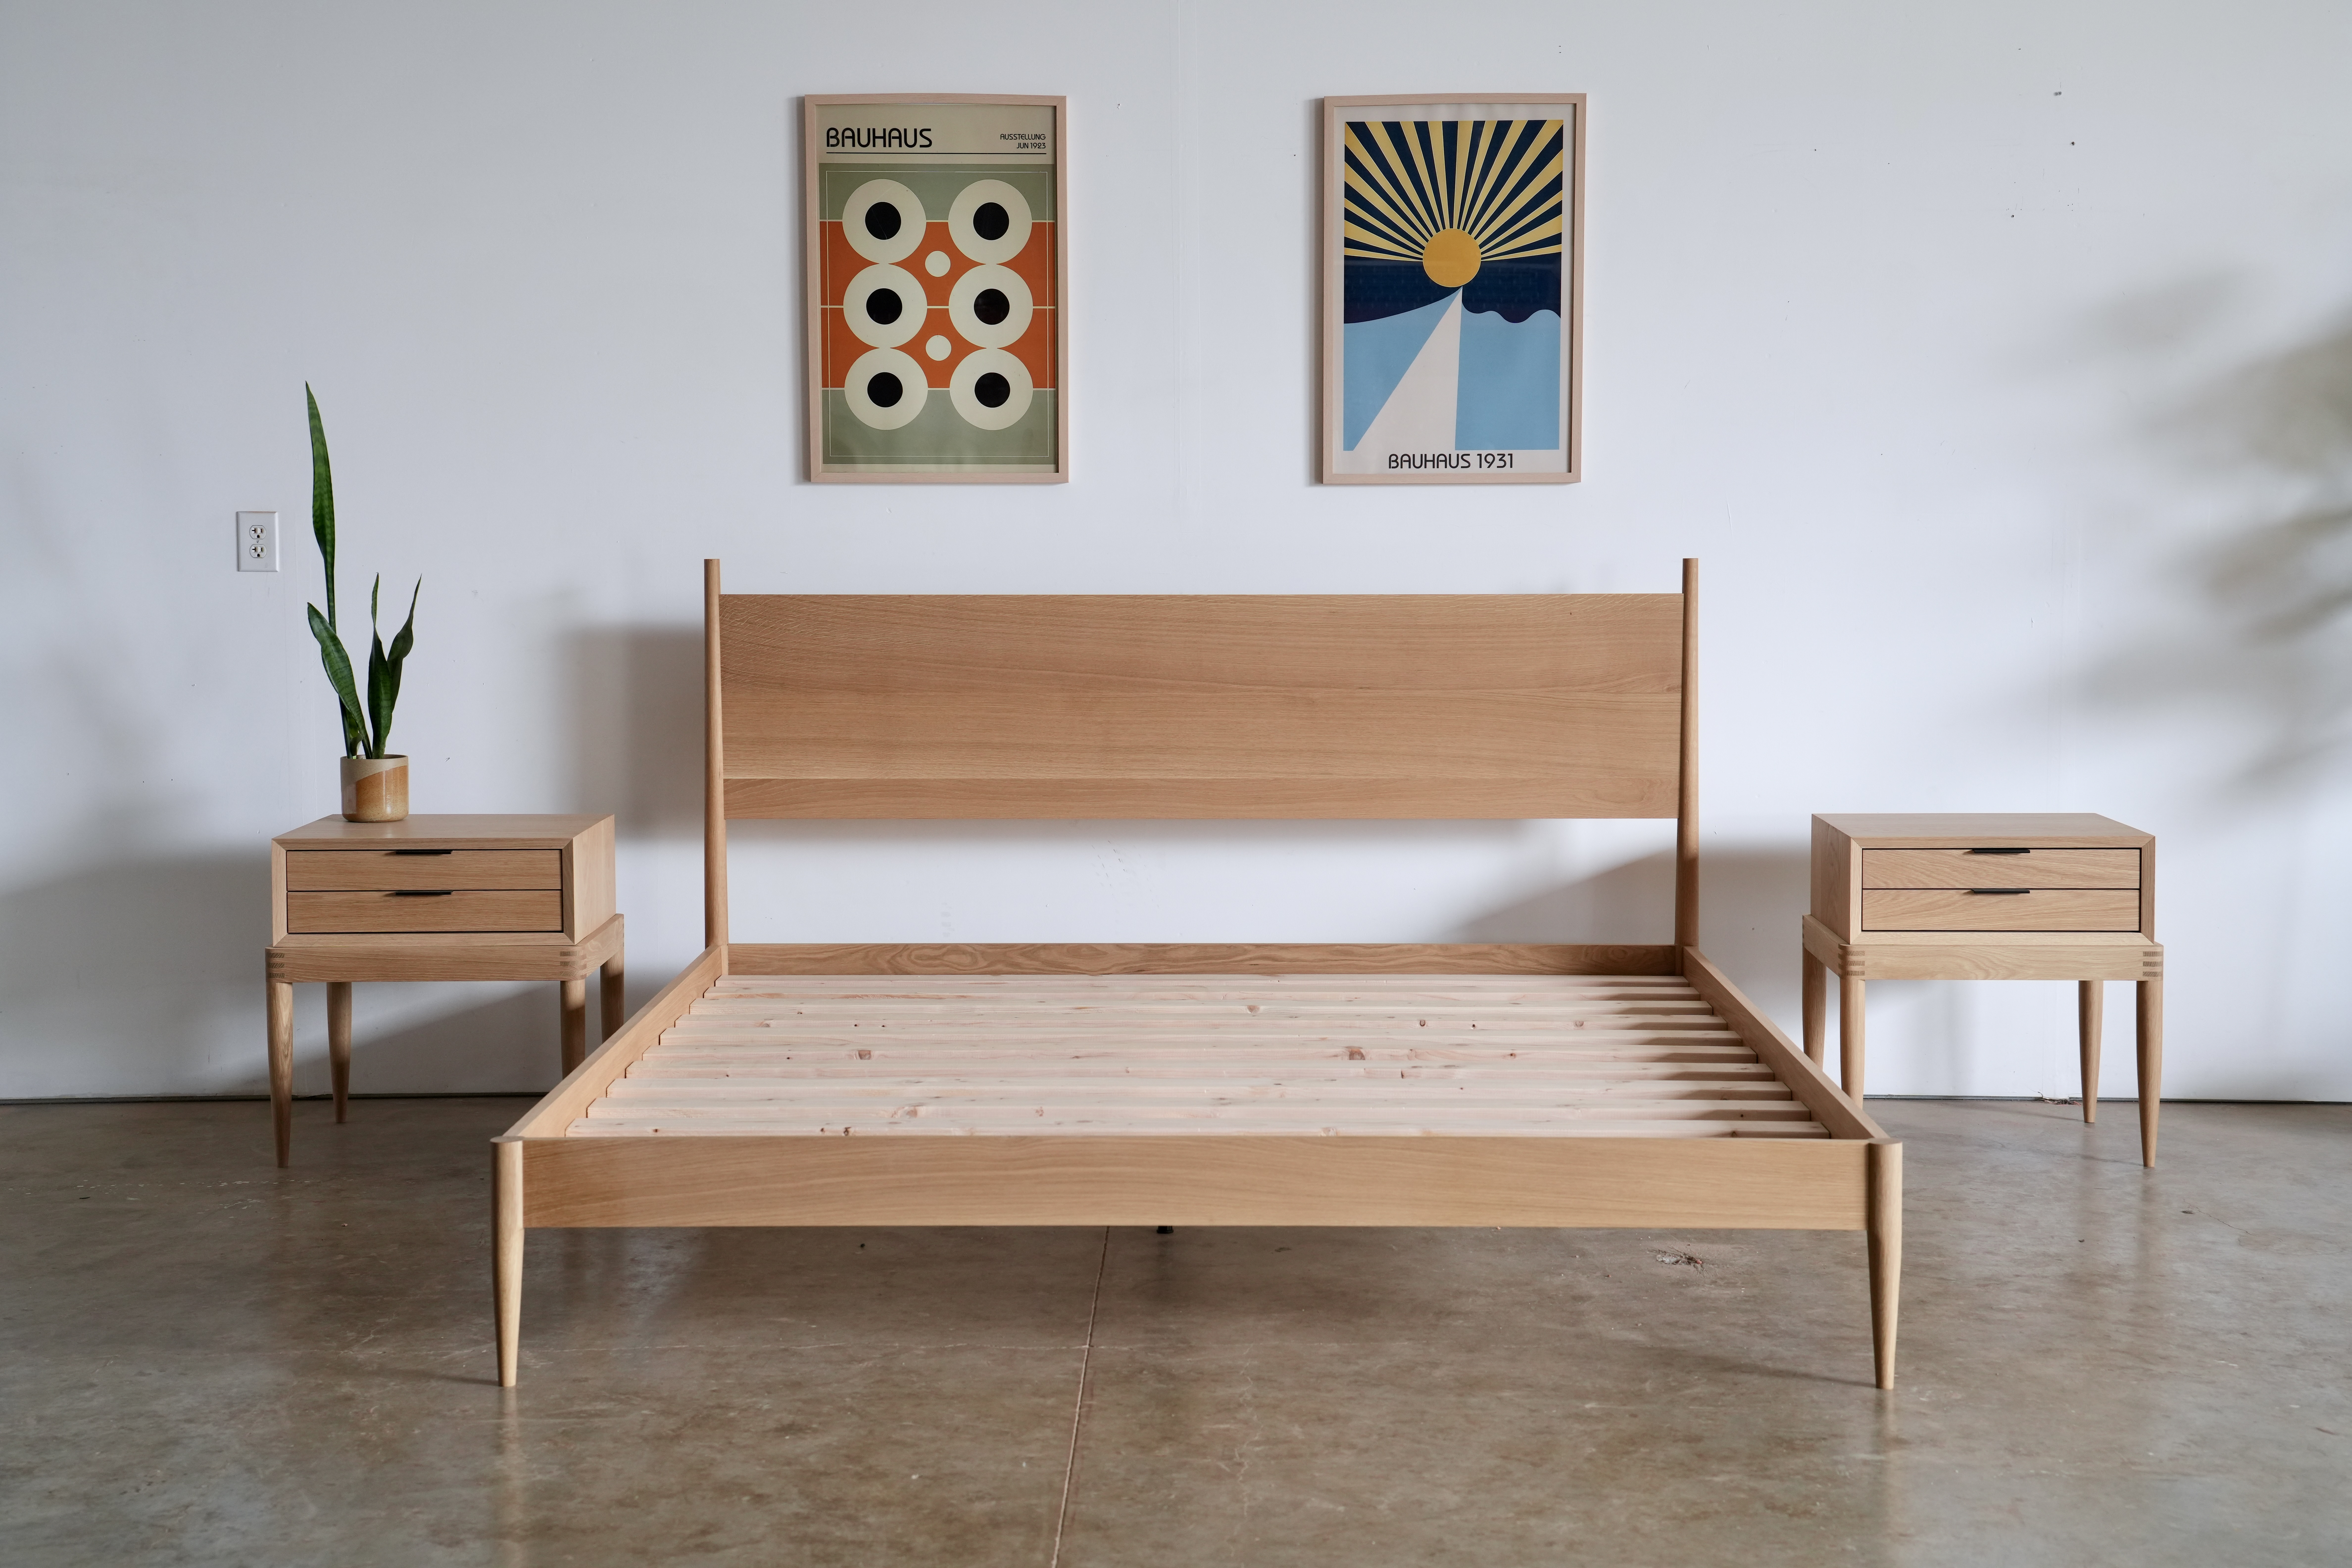 A simple midcentury modern bed made of white oak. There is no mattress so one can see the slats and two matching oak nightstands sit on either side of the bed.